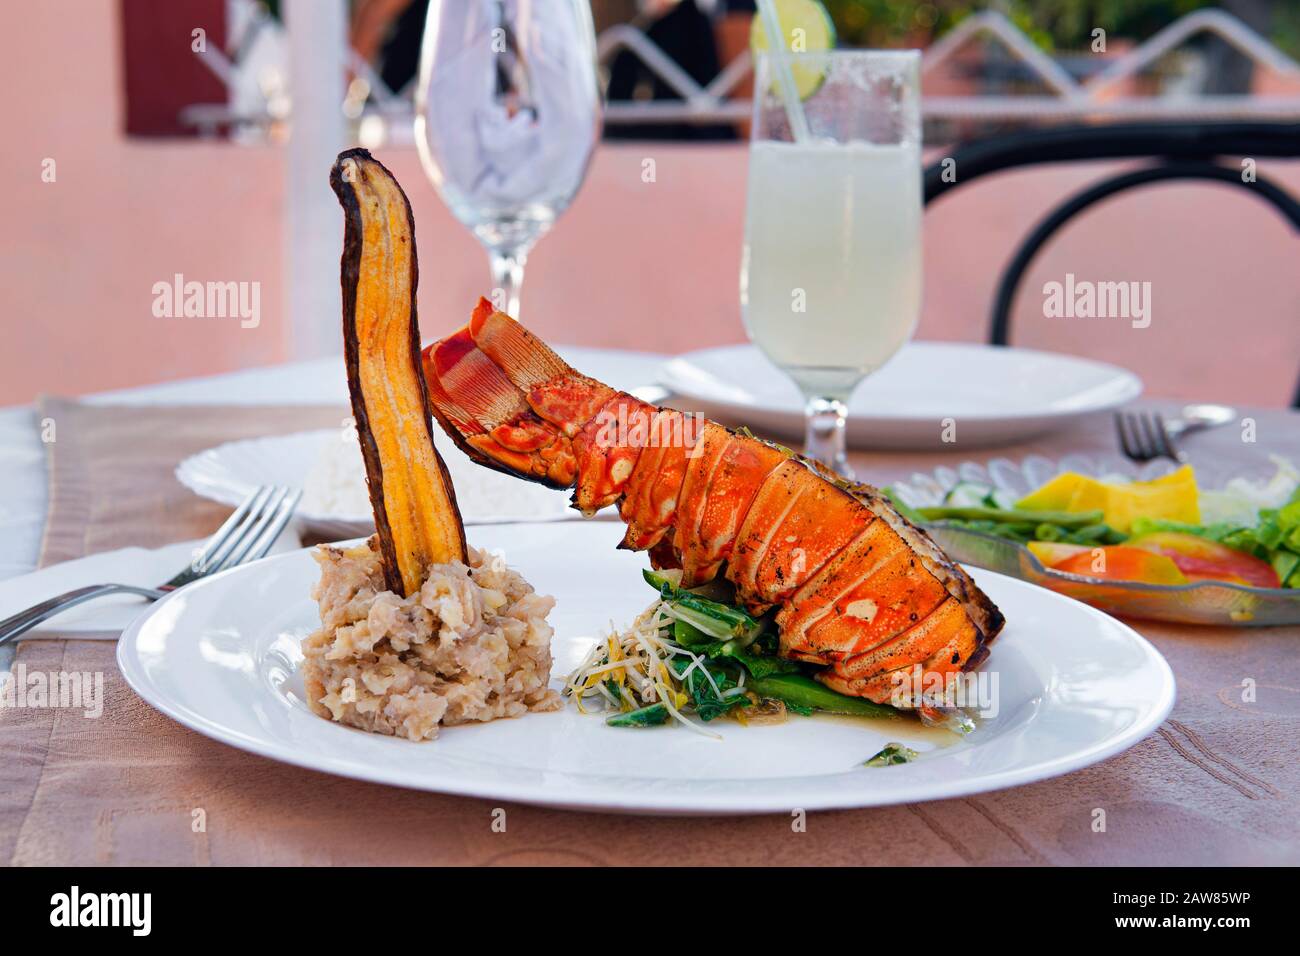 Grilled lobster is beautifully placed on a plate along with a side dish of mashed potatoes, fried banana, vegetables and rice and a glass of cocktail. Stock Photo